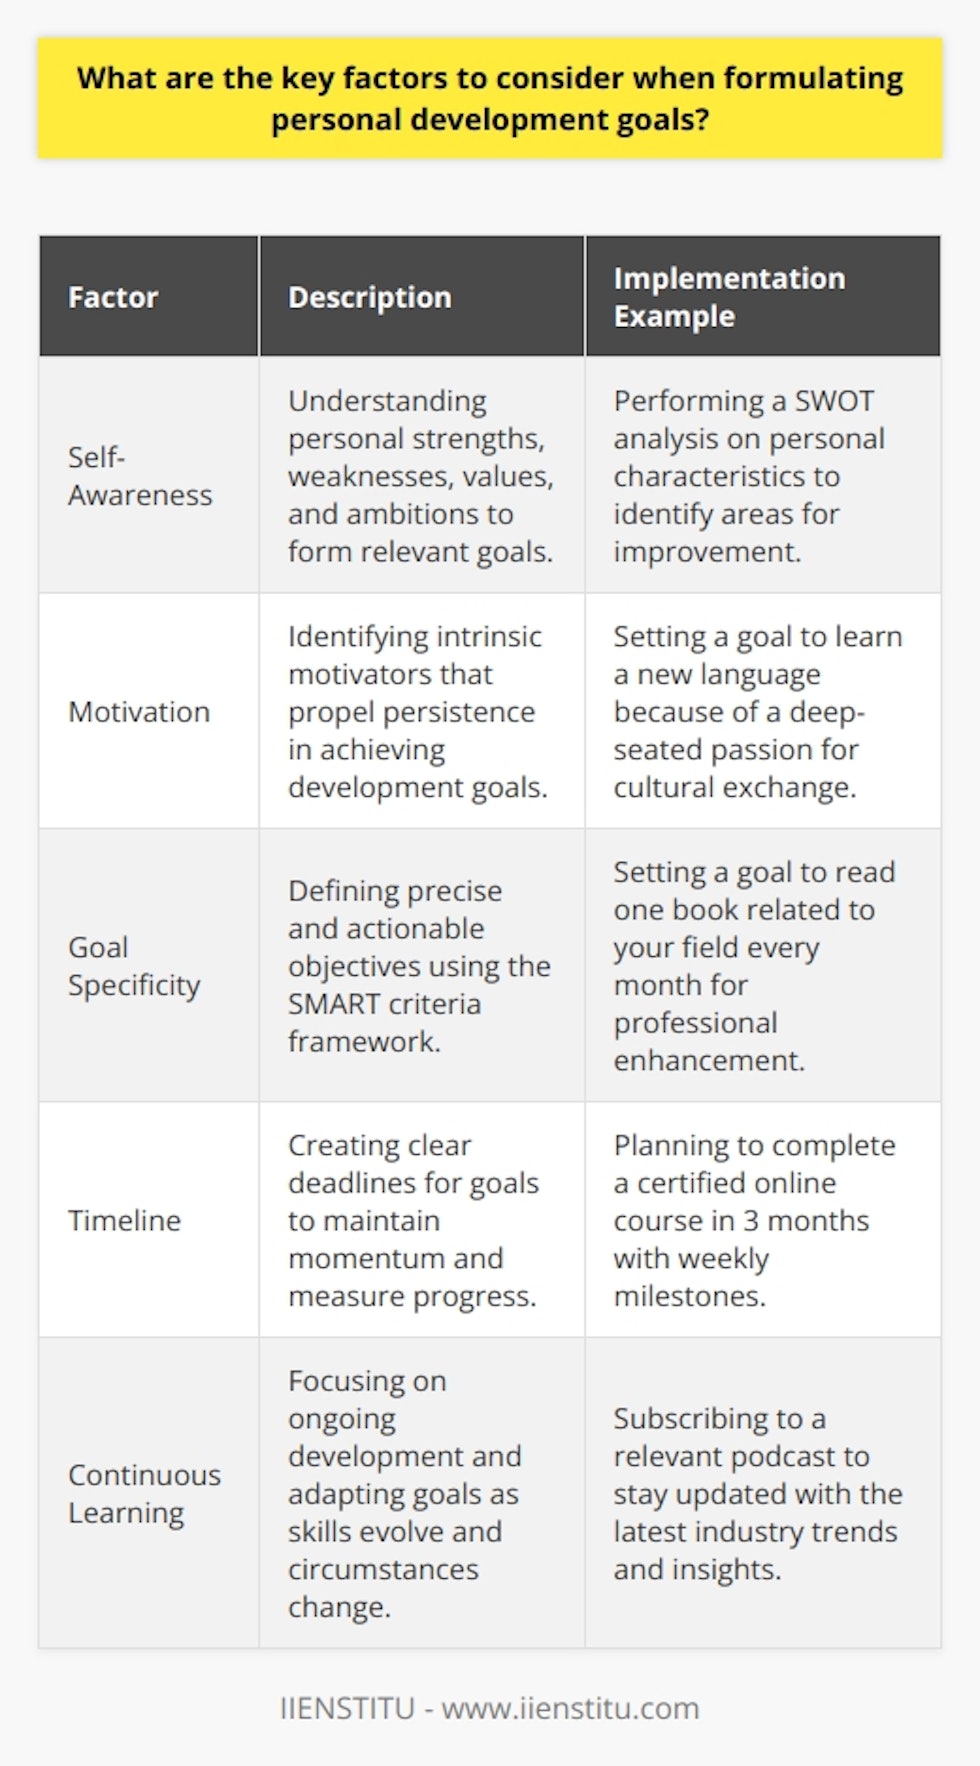 Formulating personal development goals is about identifying where you want to improve in your personal or professional life and then methodically working towards that vision. To ensure these objectives have a lasting impact, one must deliberate on several critical factors. Let’s explore what makes for strong and actionable personal development goals.Self-AwarenessKnowing oneself is the cornerstone of personal development. Reflect on your unique attributes, aspirations, and the factors influencing your life and choices. Self-awareness entails a deep understanding of your capabilities, emotional patterns, values, and the areas where you could benefit from improvement. Goals anchored in this self-knowledge are more authentic and resonate deeply with personal values, leading to a higher commitment level.MotivationIntrinsic motivation is the internal drive that compels you to act towards your goals. It stems from personal satisfaction or the desire to achieve personal growth, rather than external rewards. Understanding what motivates you is vital because motivation fuels perseverance, especially when faced with challenges. An effective goal taps into this motivational source, ensuring sustained effort over time.Goal SpecificityA successful personal development plan hinges on setting clear and specific goals. General aspirations like improve my communication skills are less actionable than practice public speaking twice a month. The more specific your goal, the easier it is to plan steps towards achieving it. Employing the SMART criteria ensures your goals are not only specific but also measurable, achievable, relevant, and time-bound, making them more tangible and likely to be accomplished.TimelineGoals need a defined timeline to provide a sense of urgency and focus. Structured timeframes set a pace for progress and serve as motivators. They also facilitate the breaking down of a long-term vision into short-term objectives. Be realistic about time constraints and personal commitments when setting these durations to avoid setting yourself up for stress or failure.In summary, integrating self-awareness, motivation, specificity, and a realistic timeline is instrumental when plotting personal development goals. Goals shaped by these factors are more than mere intentions; they transform into a series of purposeful actions leading to significant personal growth. As goals are attained, they bring a sense of achievement and inspire further development, perpetuating a cycle of continuous learning and improvement.Offering innovative educational resources, IIENSTITU provides courses and materials that align with these principles, equipping learners with the tools to set effective personal development objectives. With an emphasis on real-world skills and self-growth, the organization supports individuals as they work towards crafting a detailed and actionable roadmap for their personal and professional journeys.